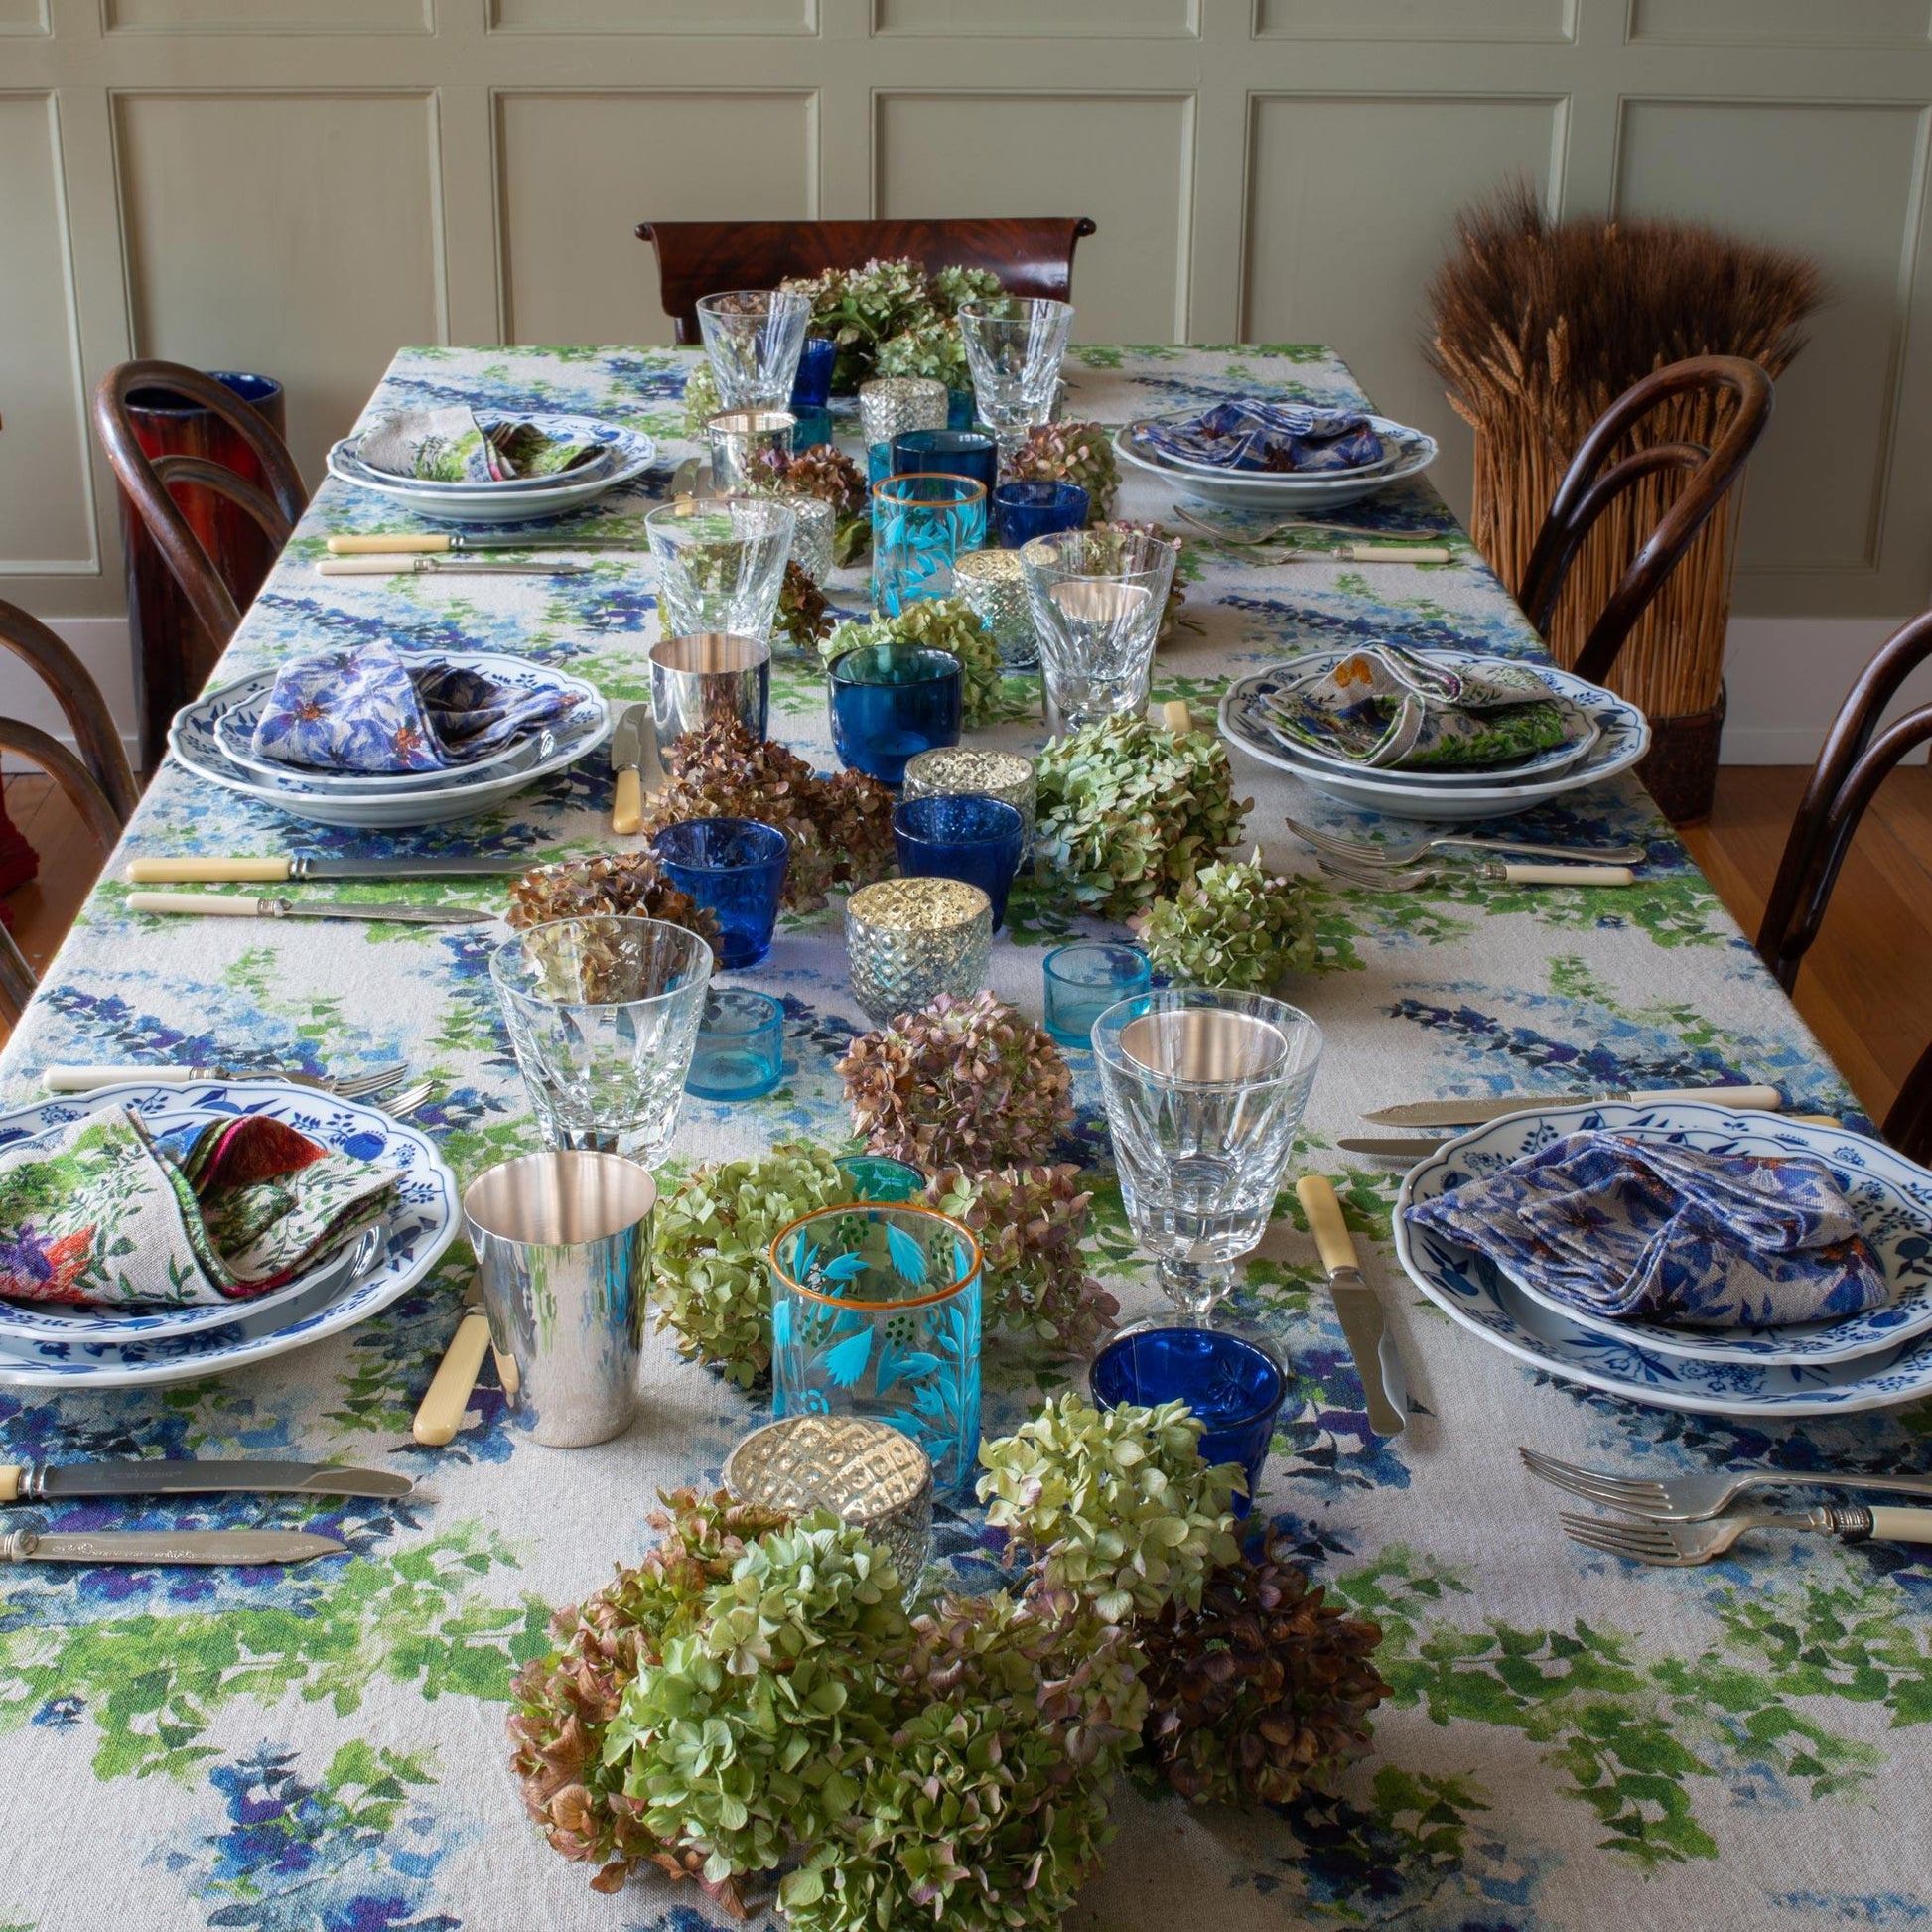 How to Wash Tablecloths and Linens